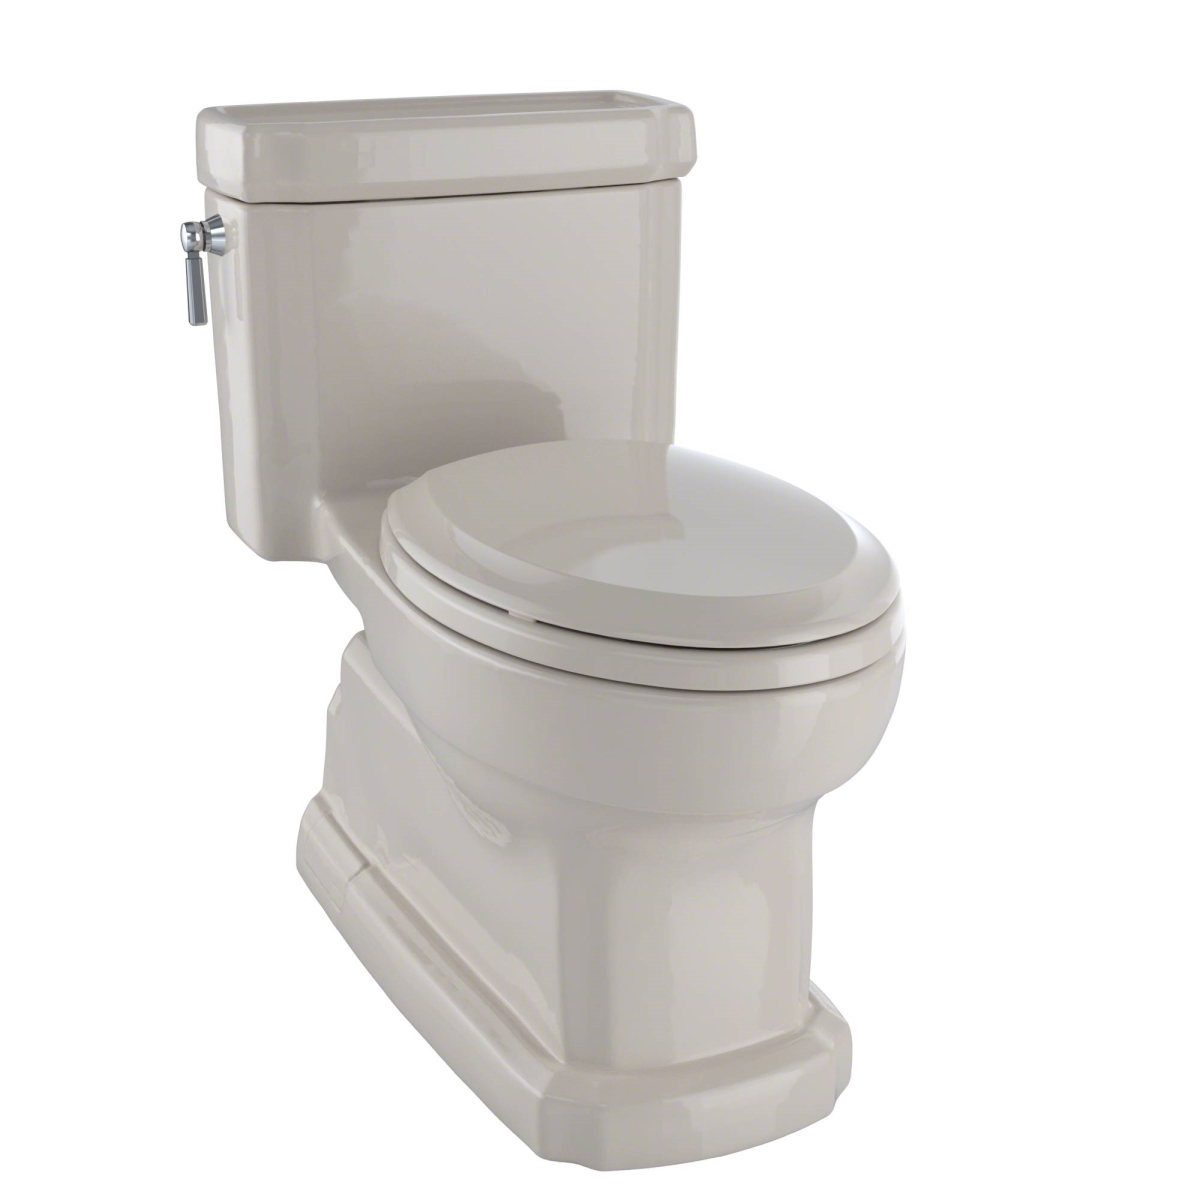 Ms974224cefg-03 Eco Guinevere Elongated 1.28 Gpf Universal Height Skirted Toilet With Cefiontect, Bone